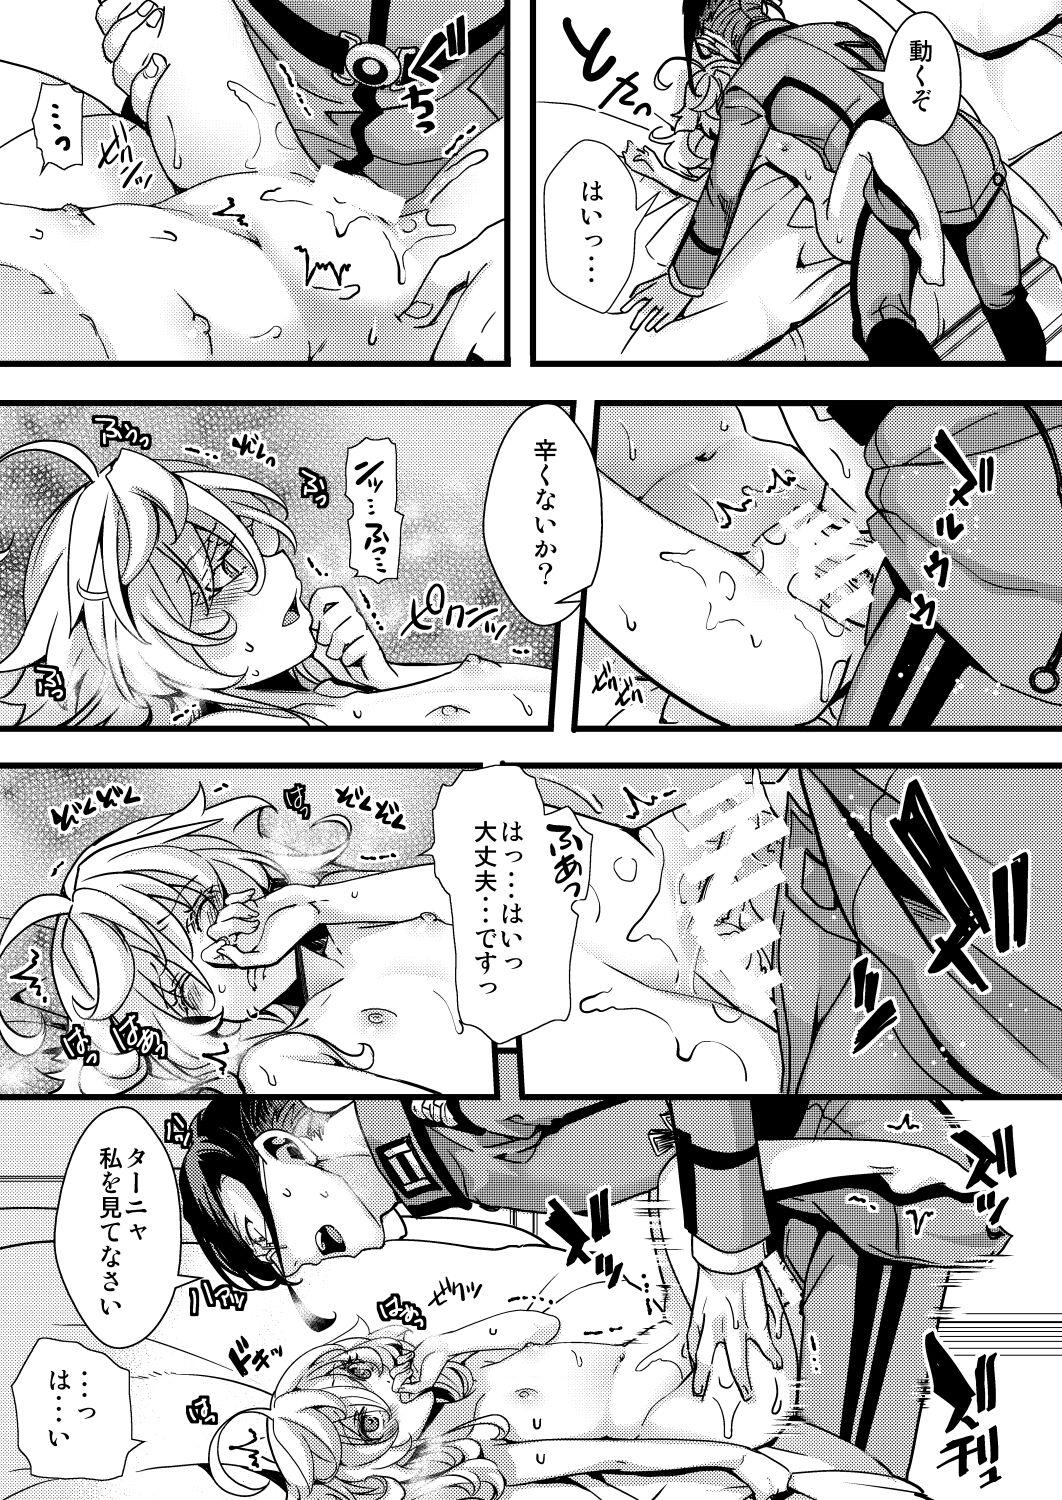 Wet Cunt Rugs - Youjo senki | saga of tanya the evil Gay Party - Page 41